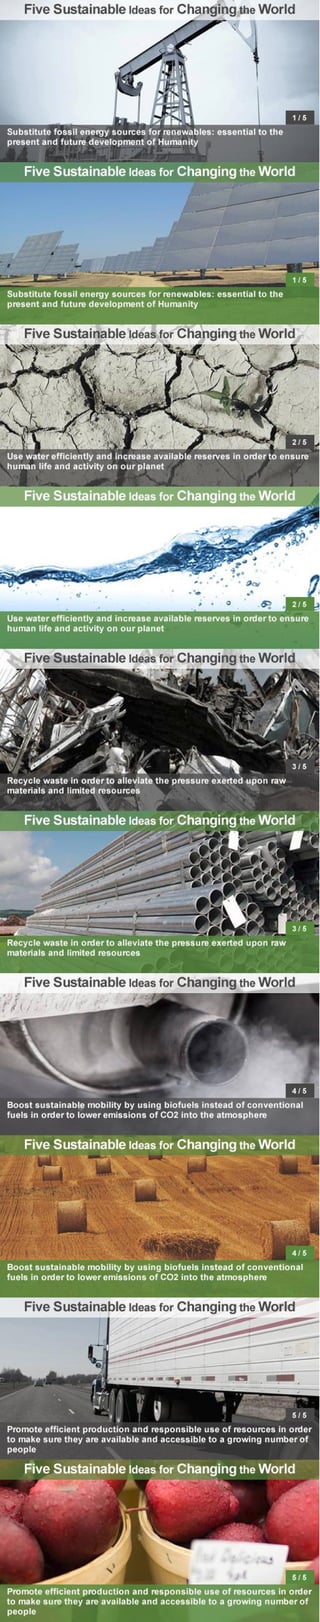 Abengoa 5 ideas for a more sustainable world